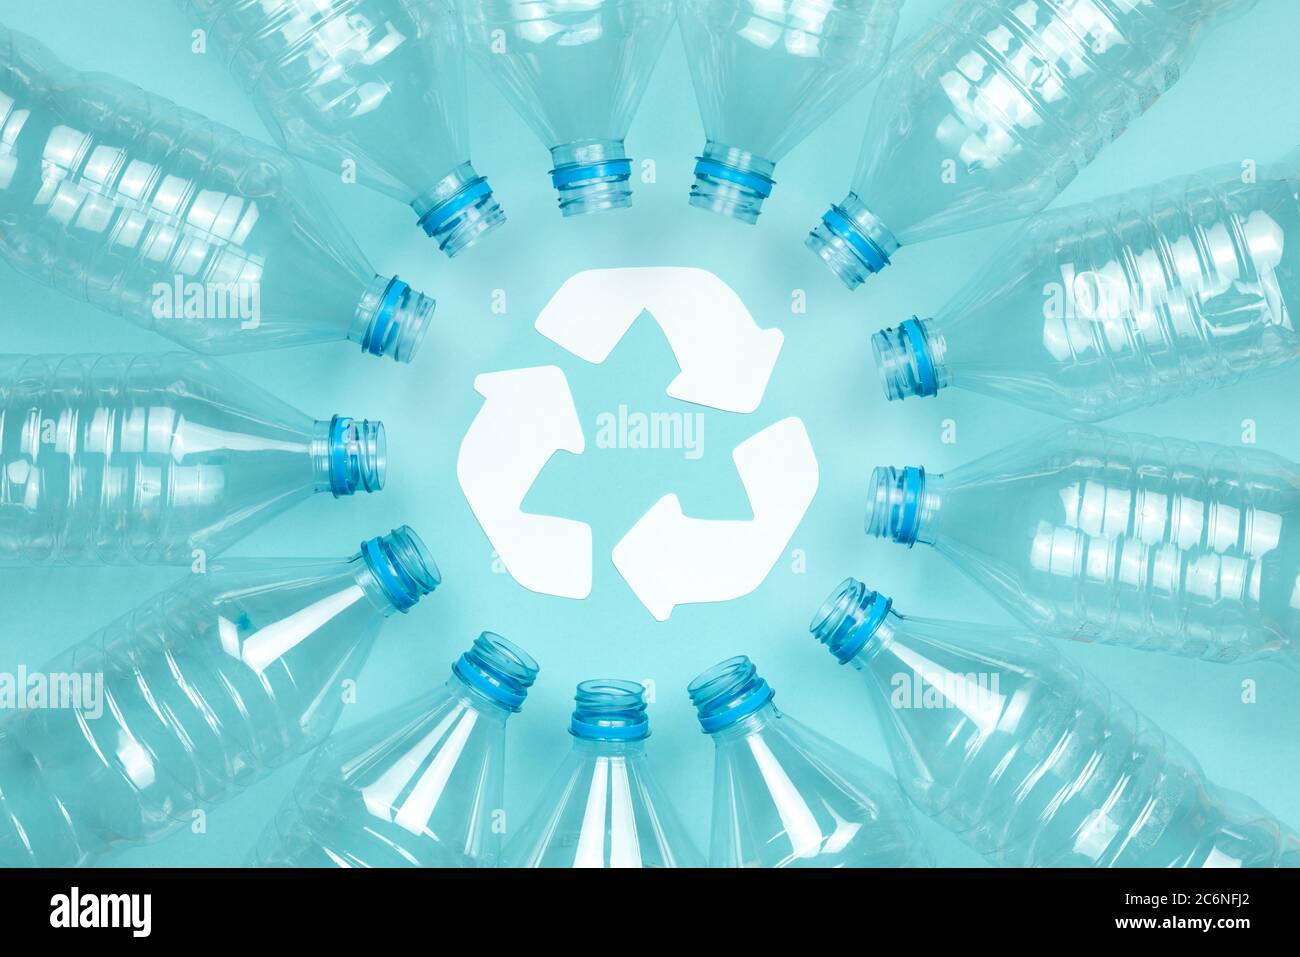 Horizontal color image with an overhead view of a clear plastic bottles without caps on a blue background. Recycling and environment concept. Stock Photo